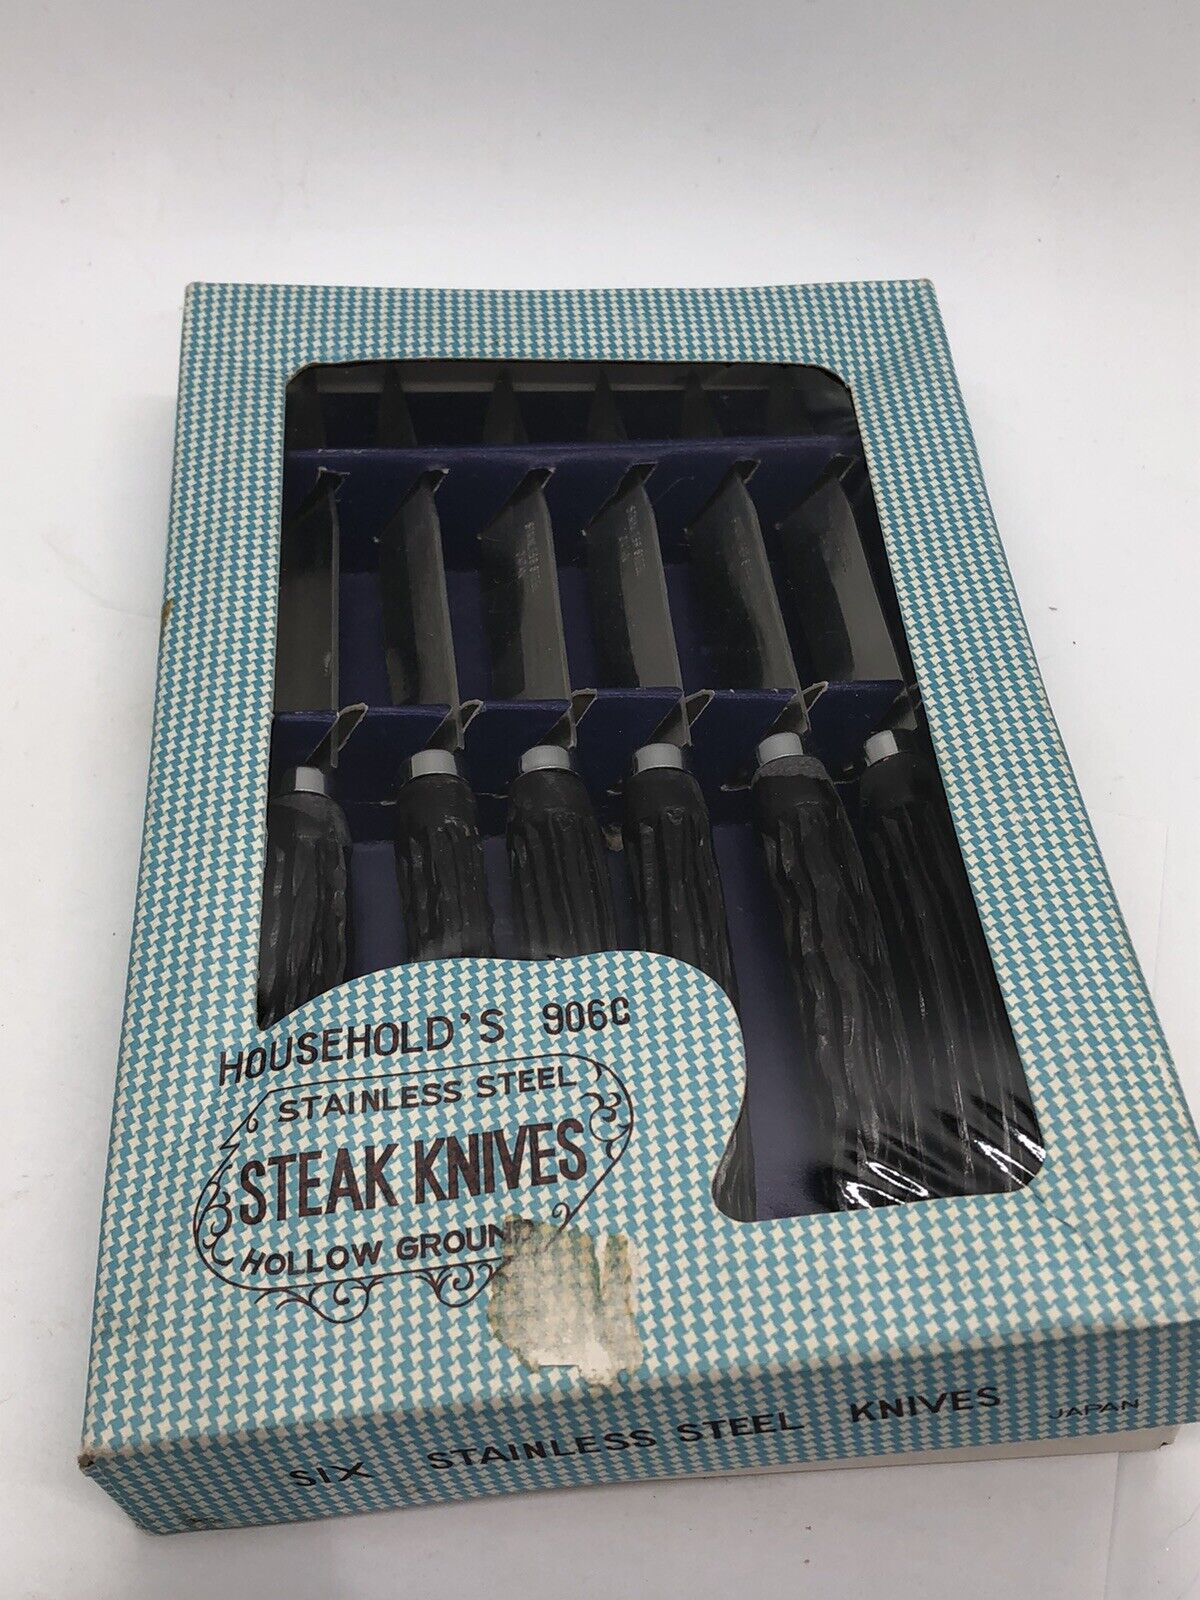 Vintage Japan stainless steak knives in box faux horn